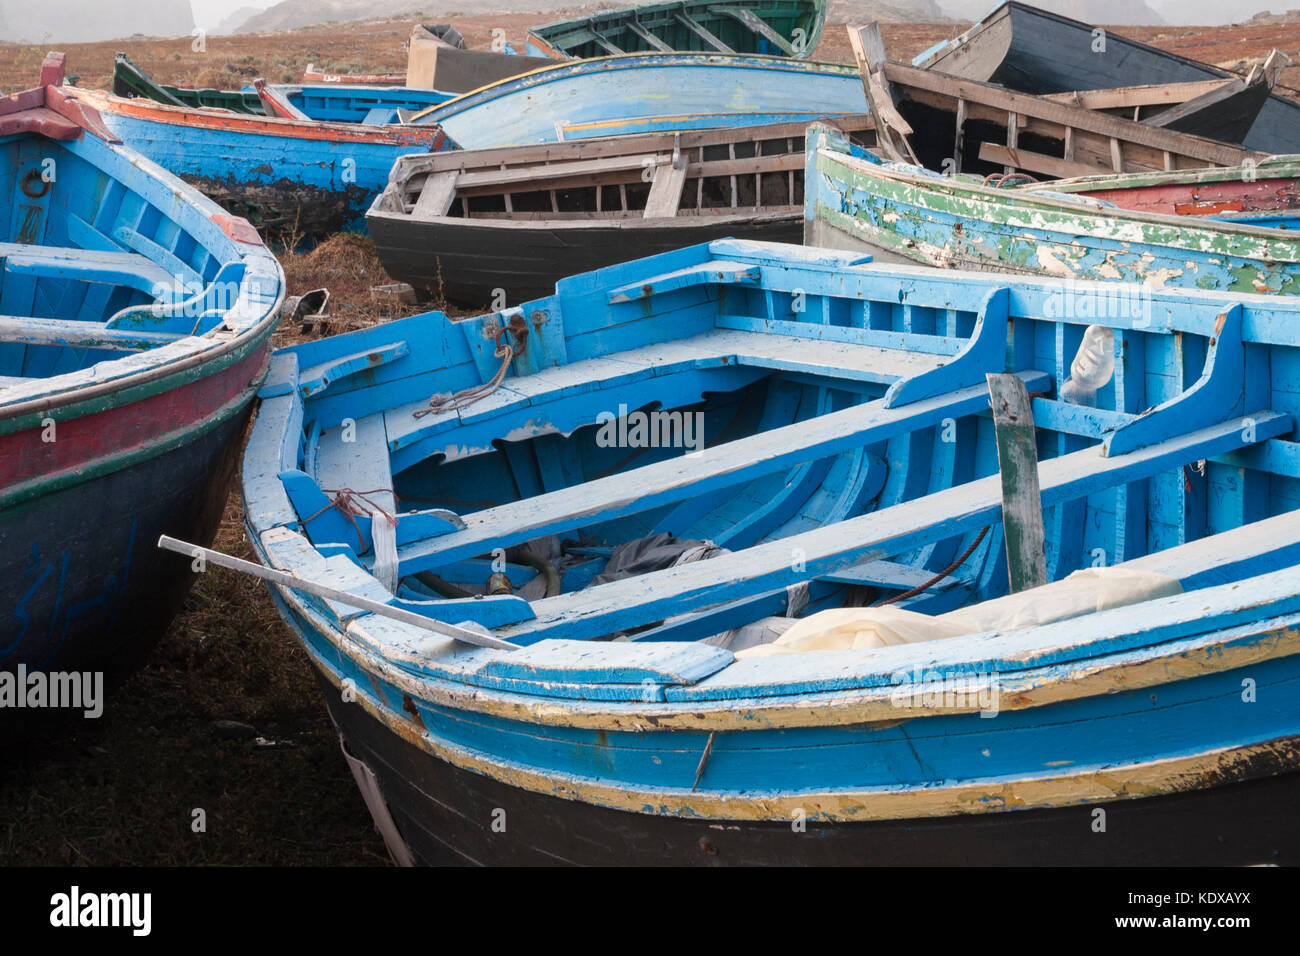 https://c8.alamy.com/comp/KDXAYX/small-fishing-boats-used-by-illegal-immigrants-crossing-from-africa-KDXAYX.jpg